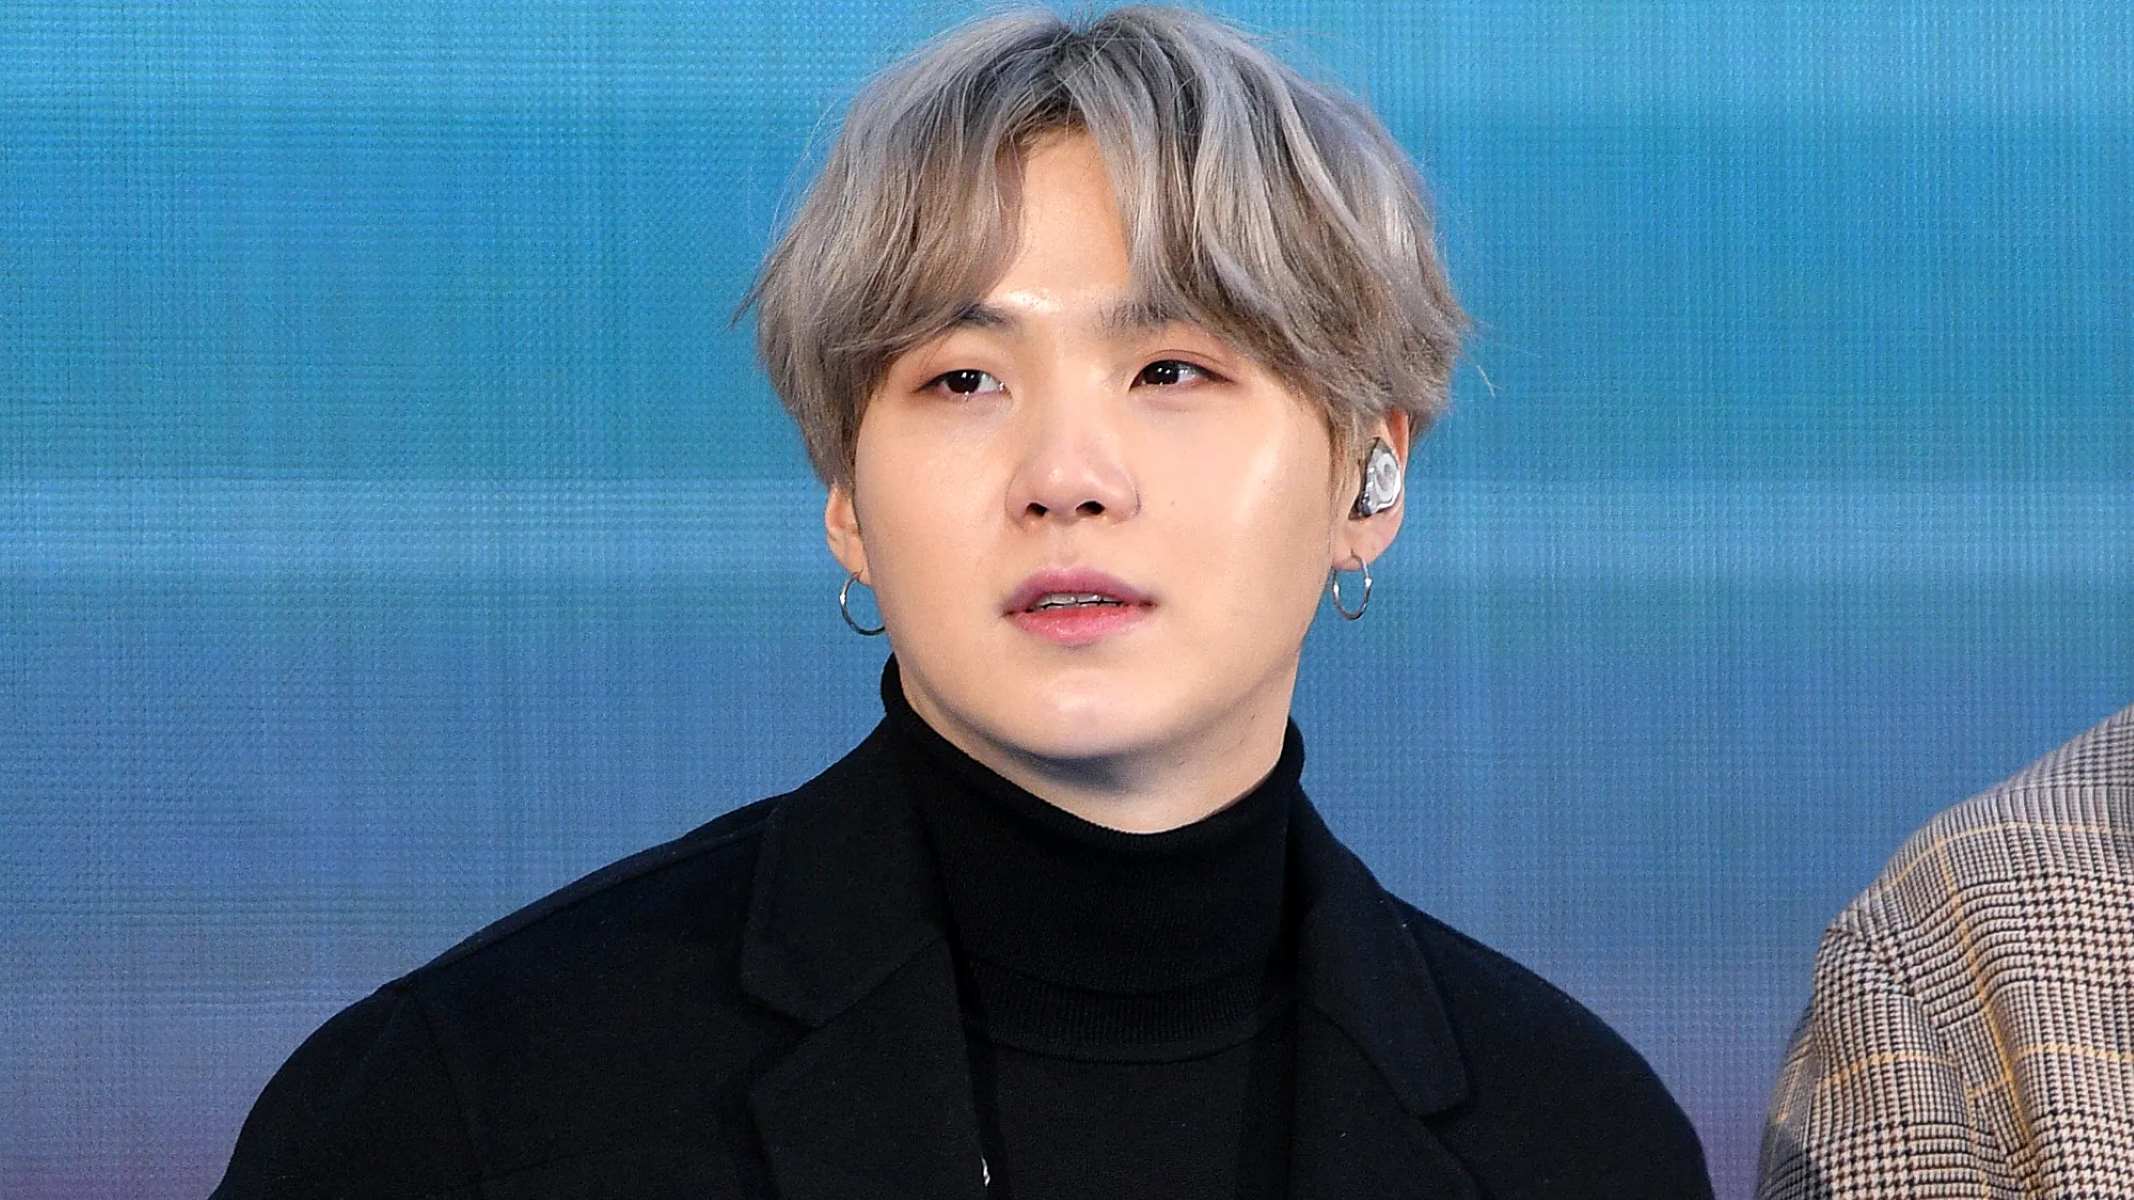 BTS's Suga's Secret Girlfriend Revealed! Their Unexpected Love Story Unveiled